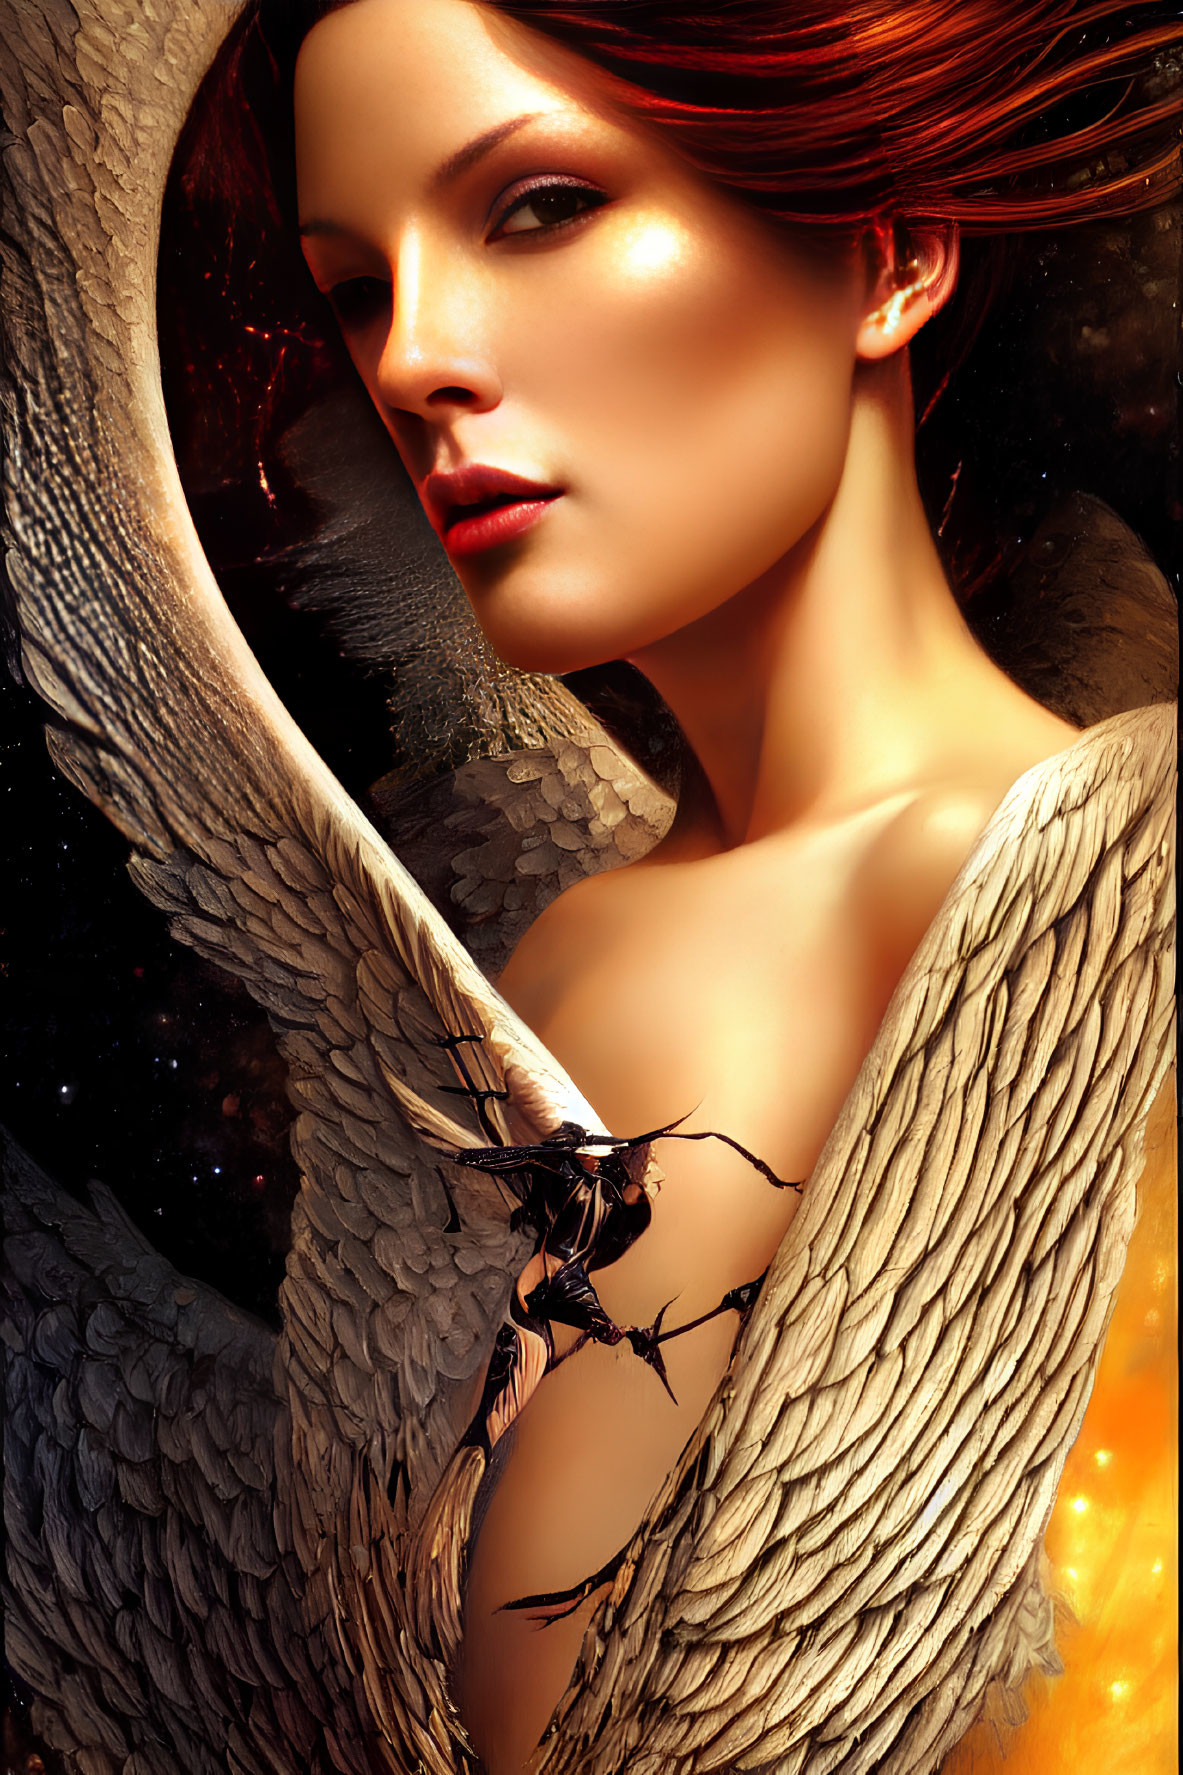 Red-haired woman enveloped in bird-like wings against fiery cosmic background